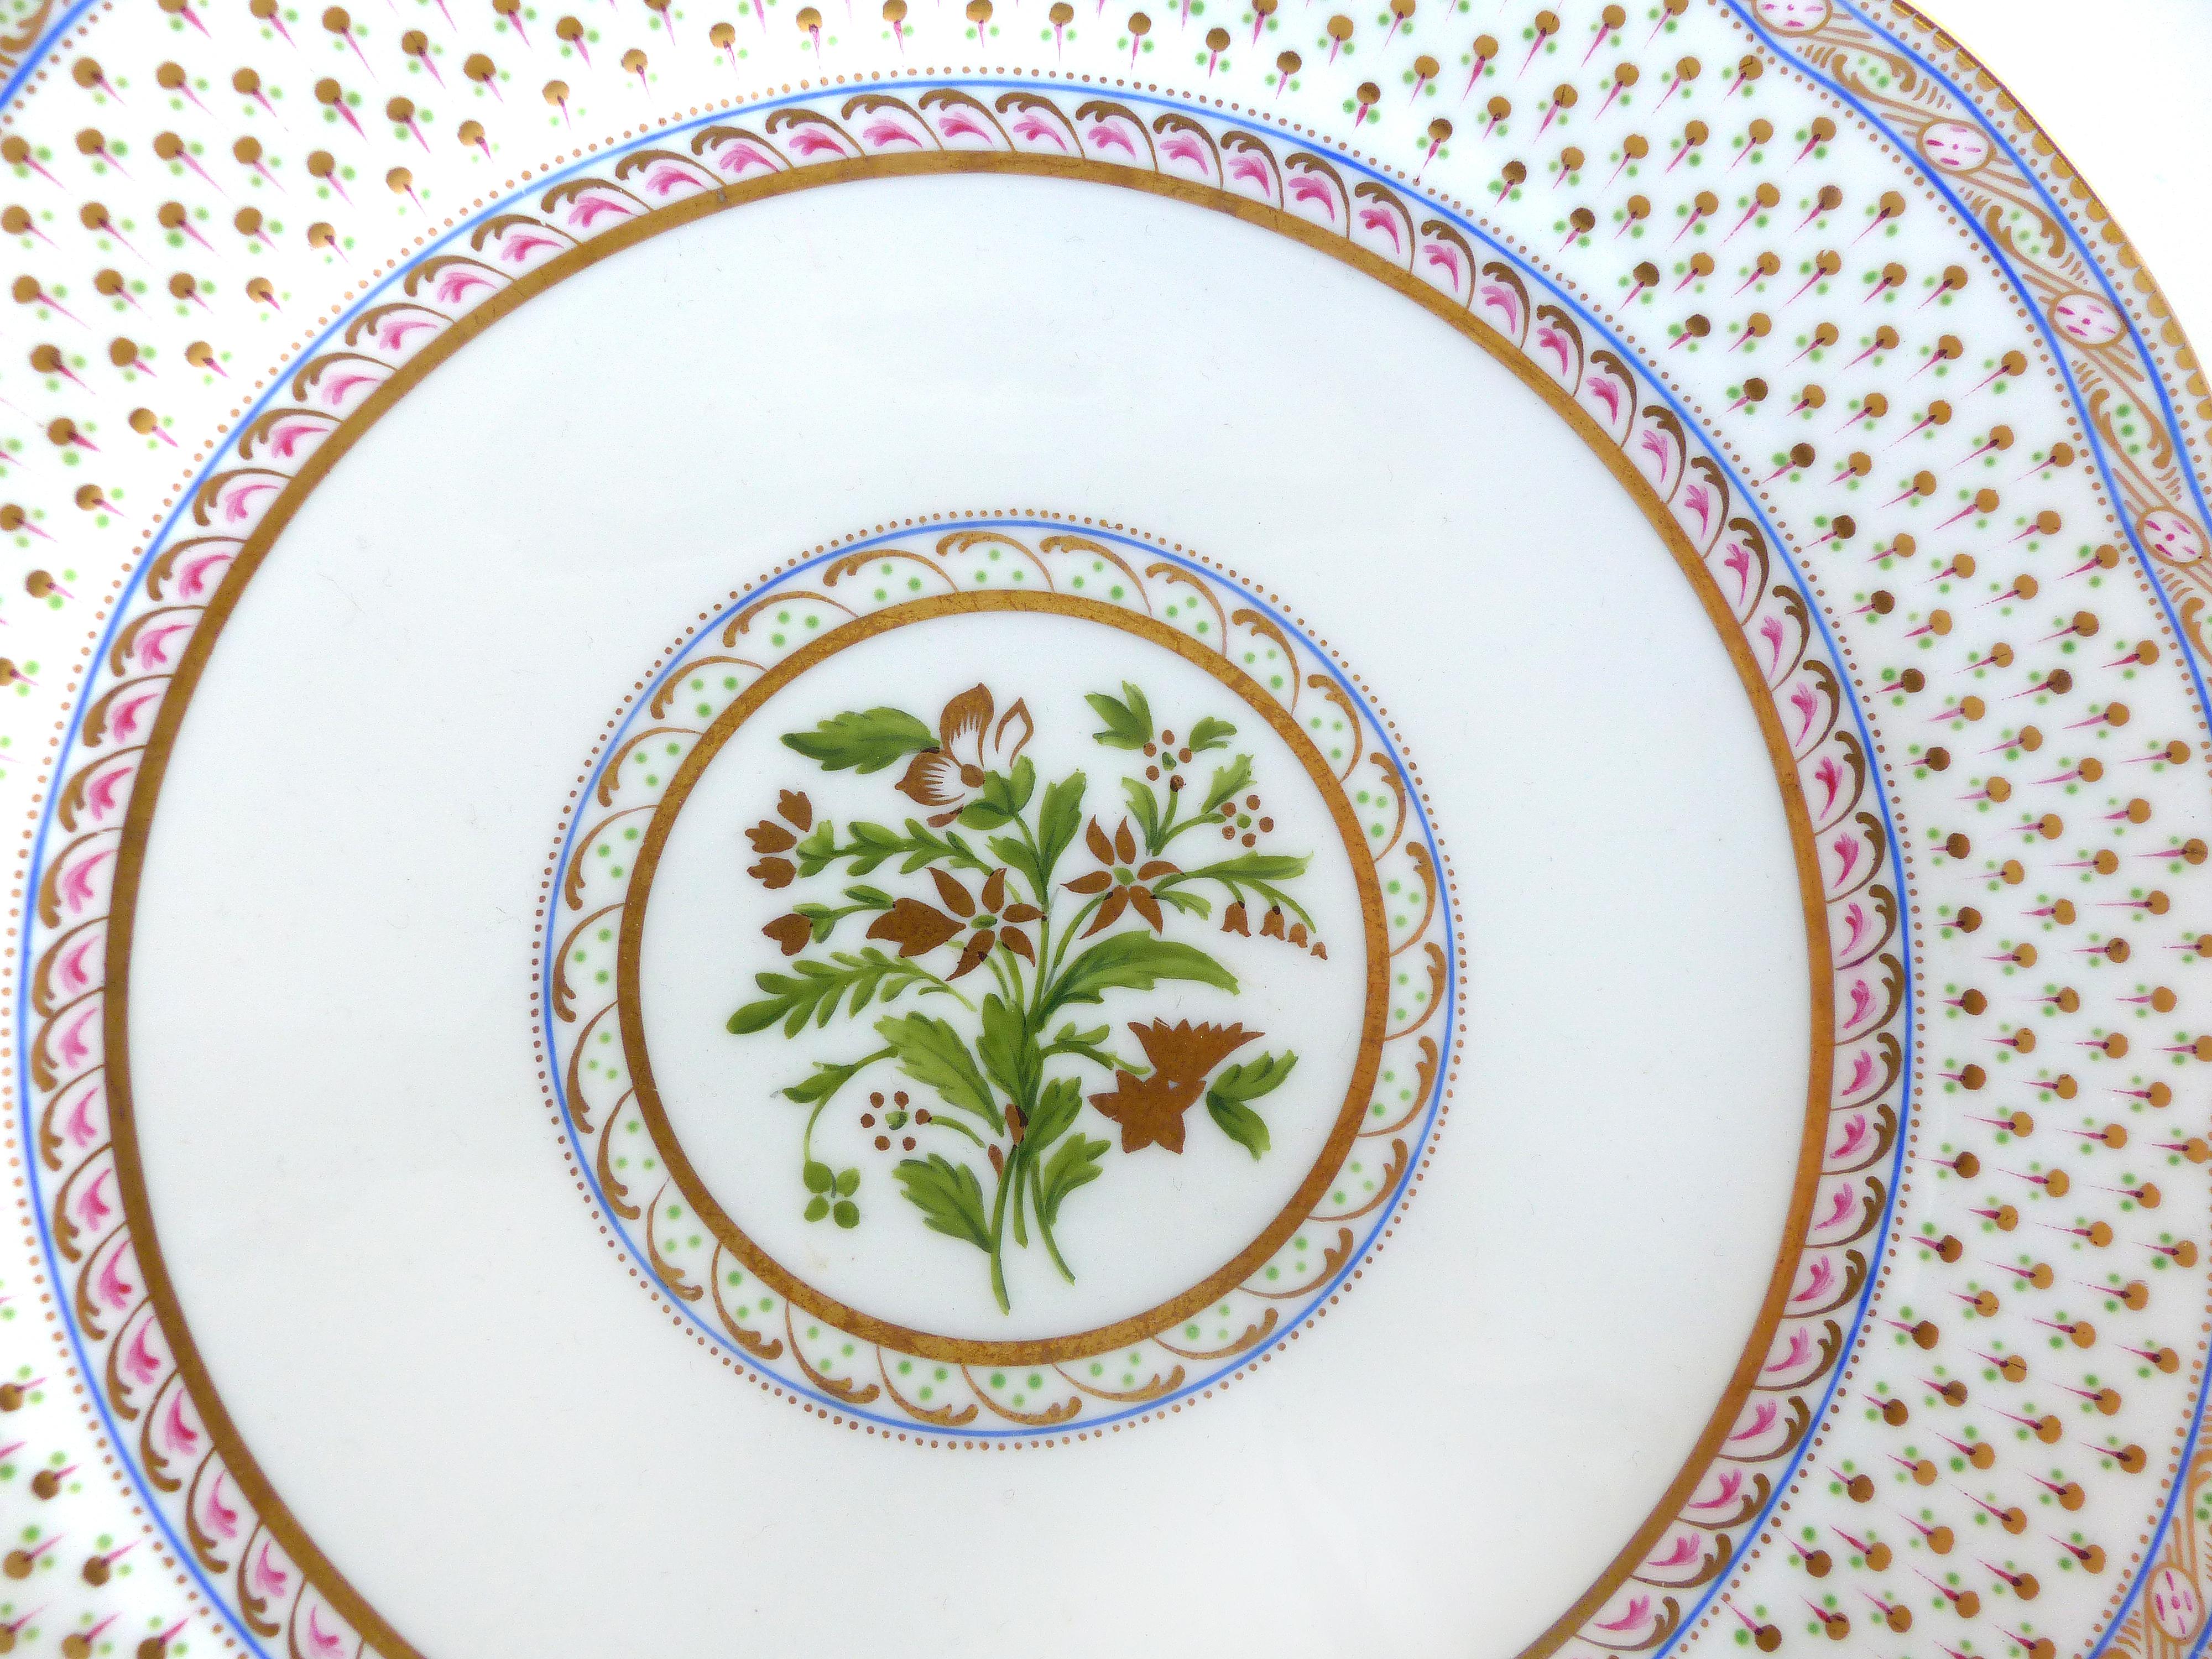 Cauldon England for Tomas Goode Fine China Luncheon/Dessert Service

Offered for sale is a fine quality porcelain luncheon/dessert service by Cauldon England for Tomas Goode and company, London. The pieces are marked beneath the bases. The set